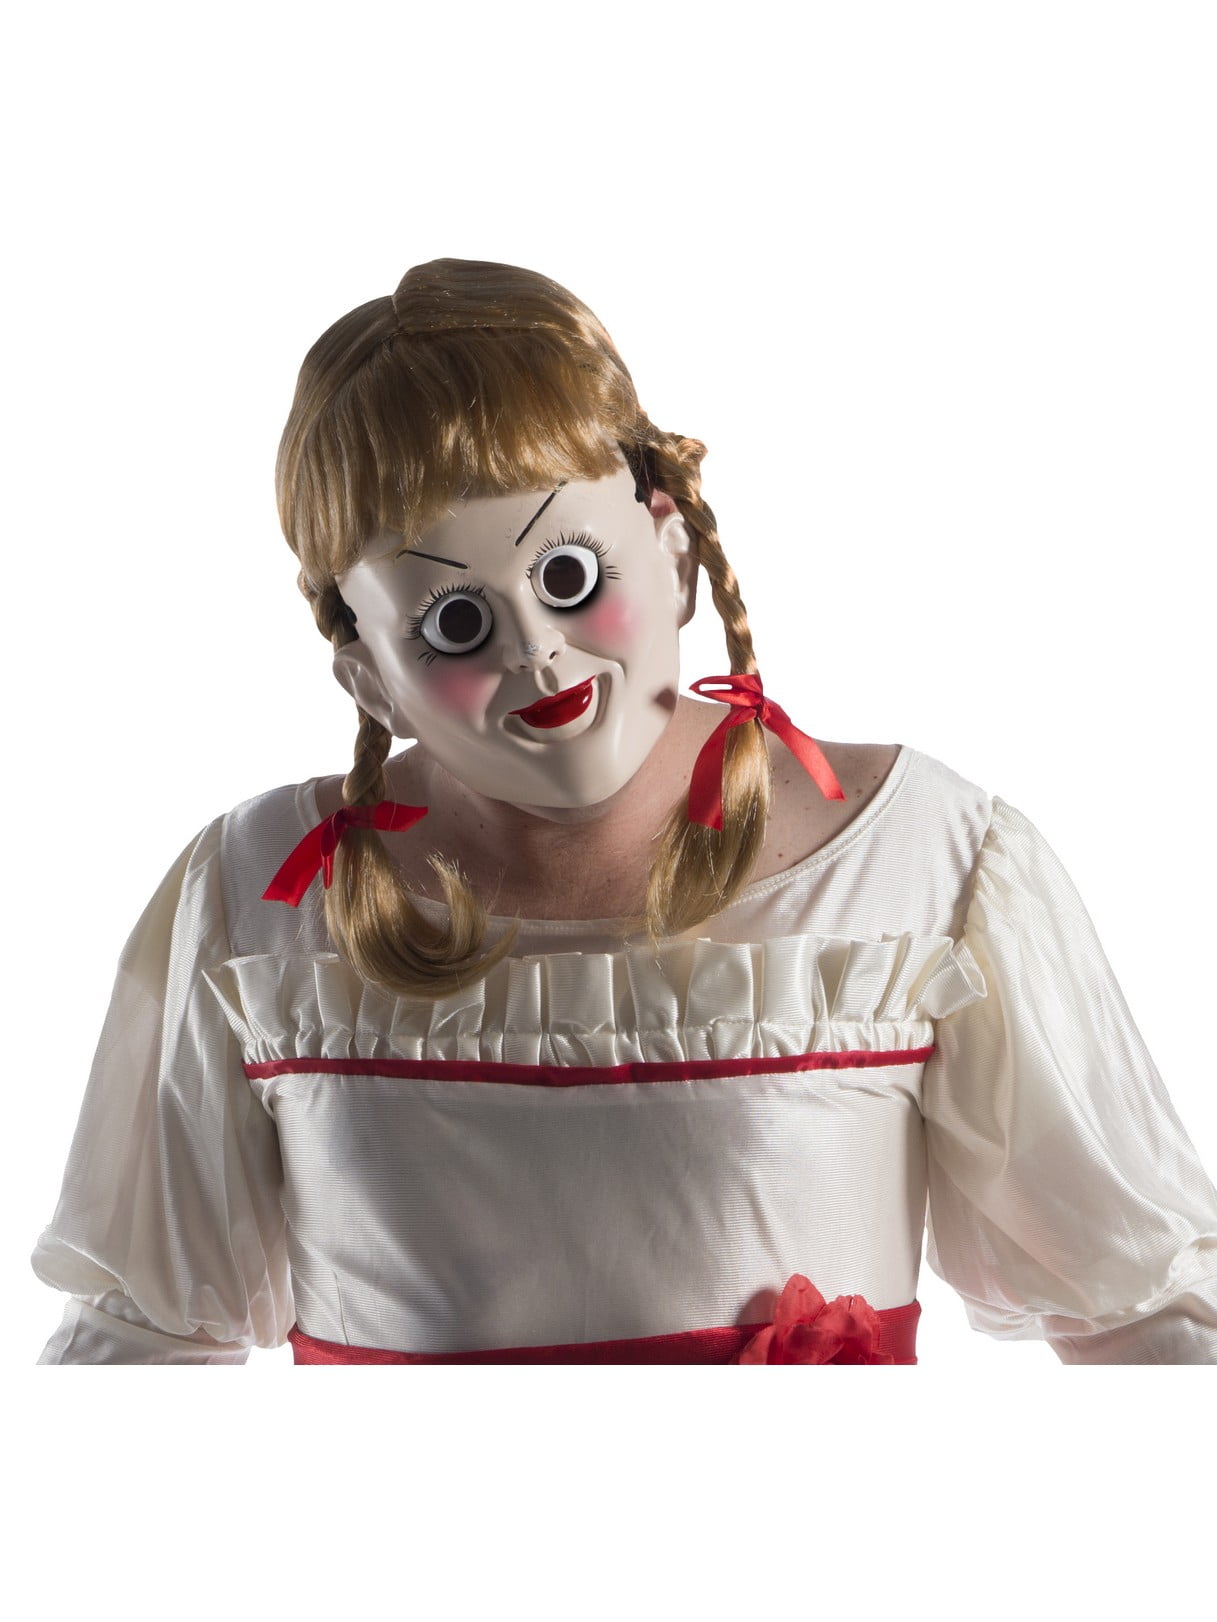 Details about   Annabelle Mask Scary Halloween Cosplay Costume Wig Adult Latex USA SELLER 